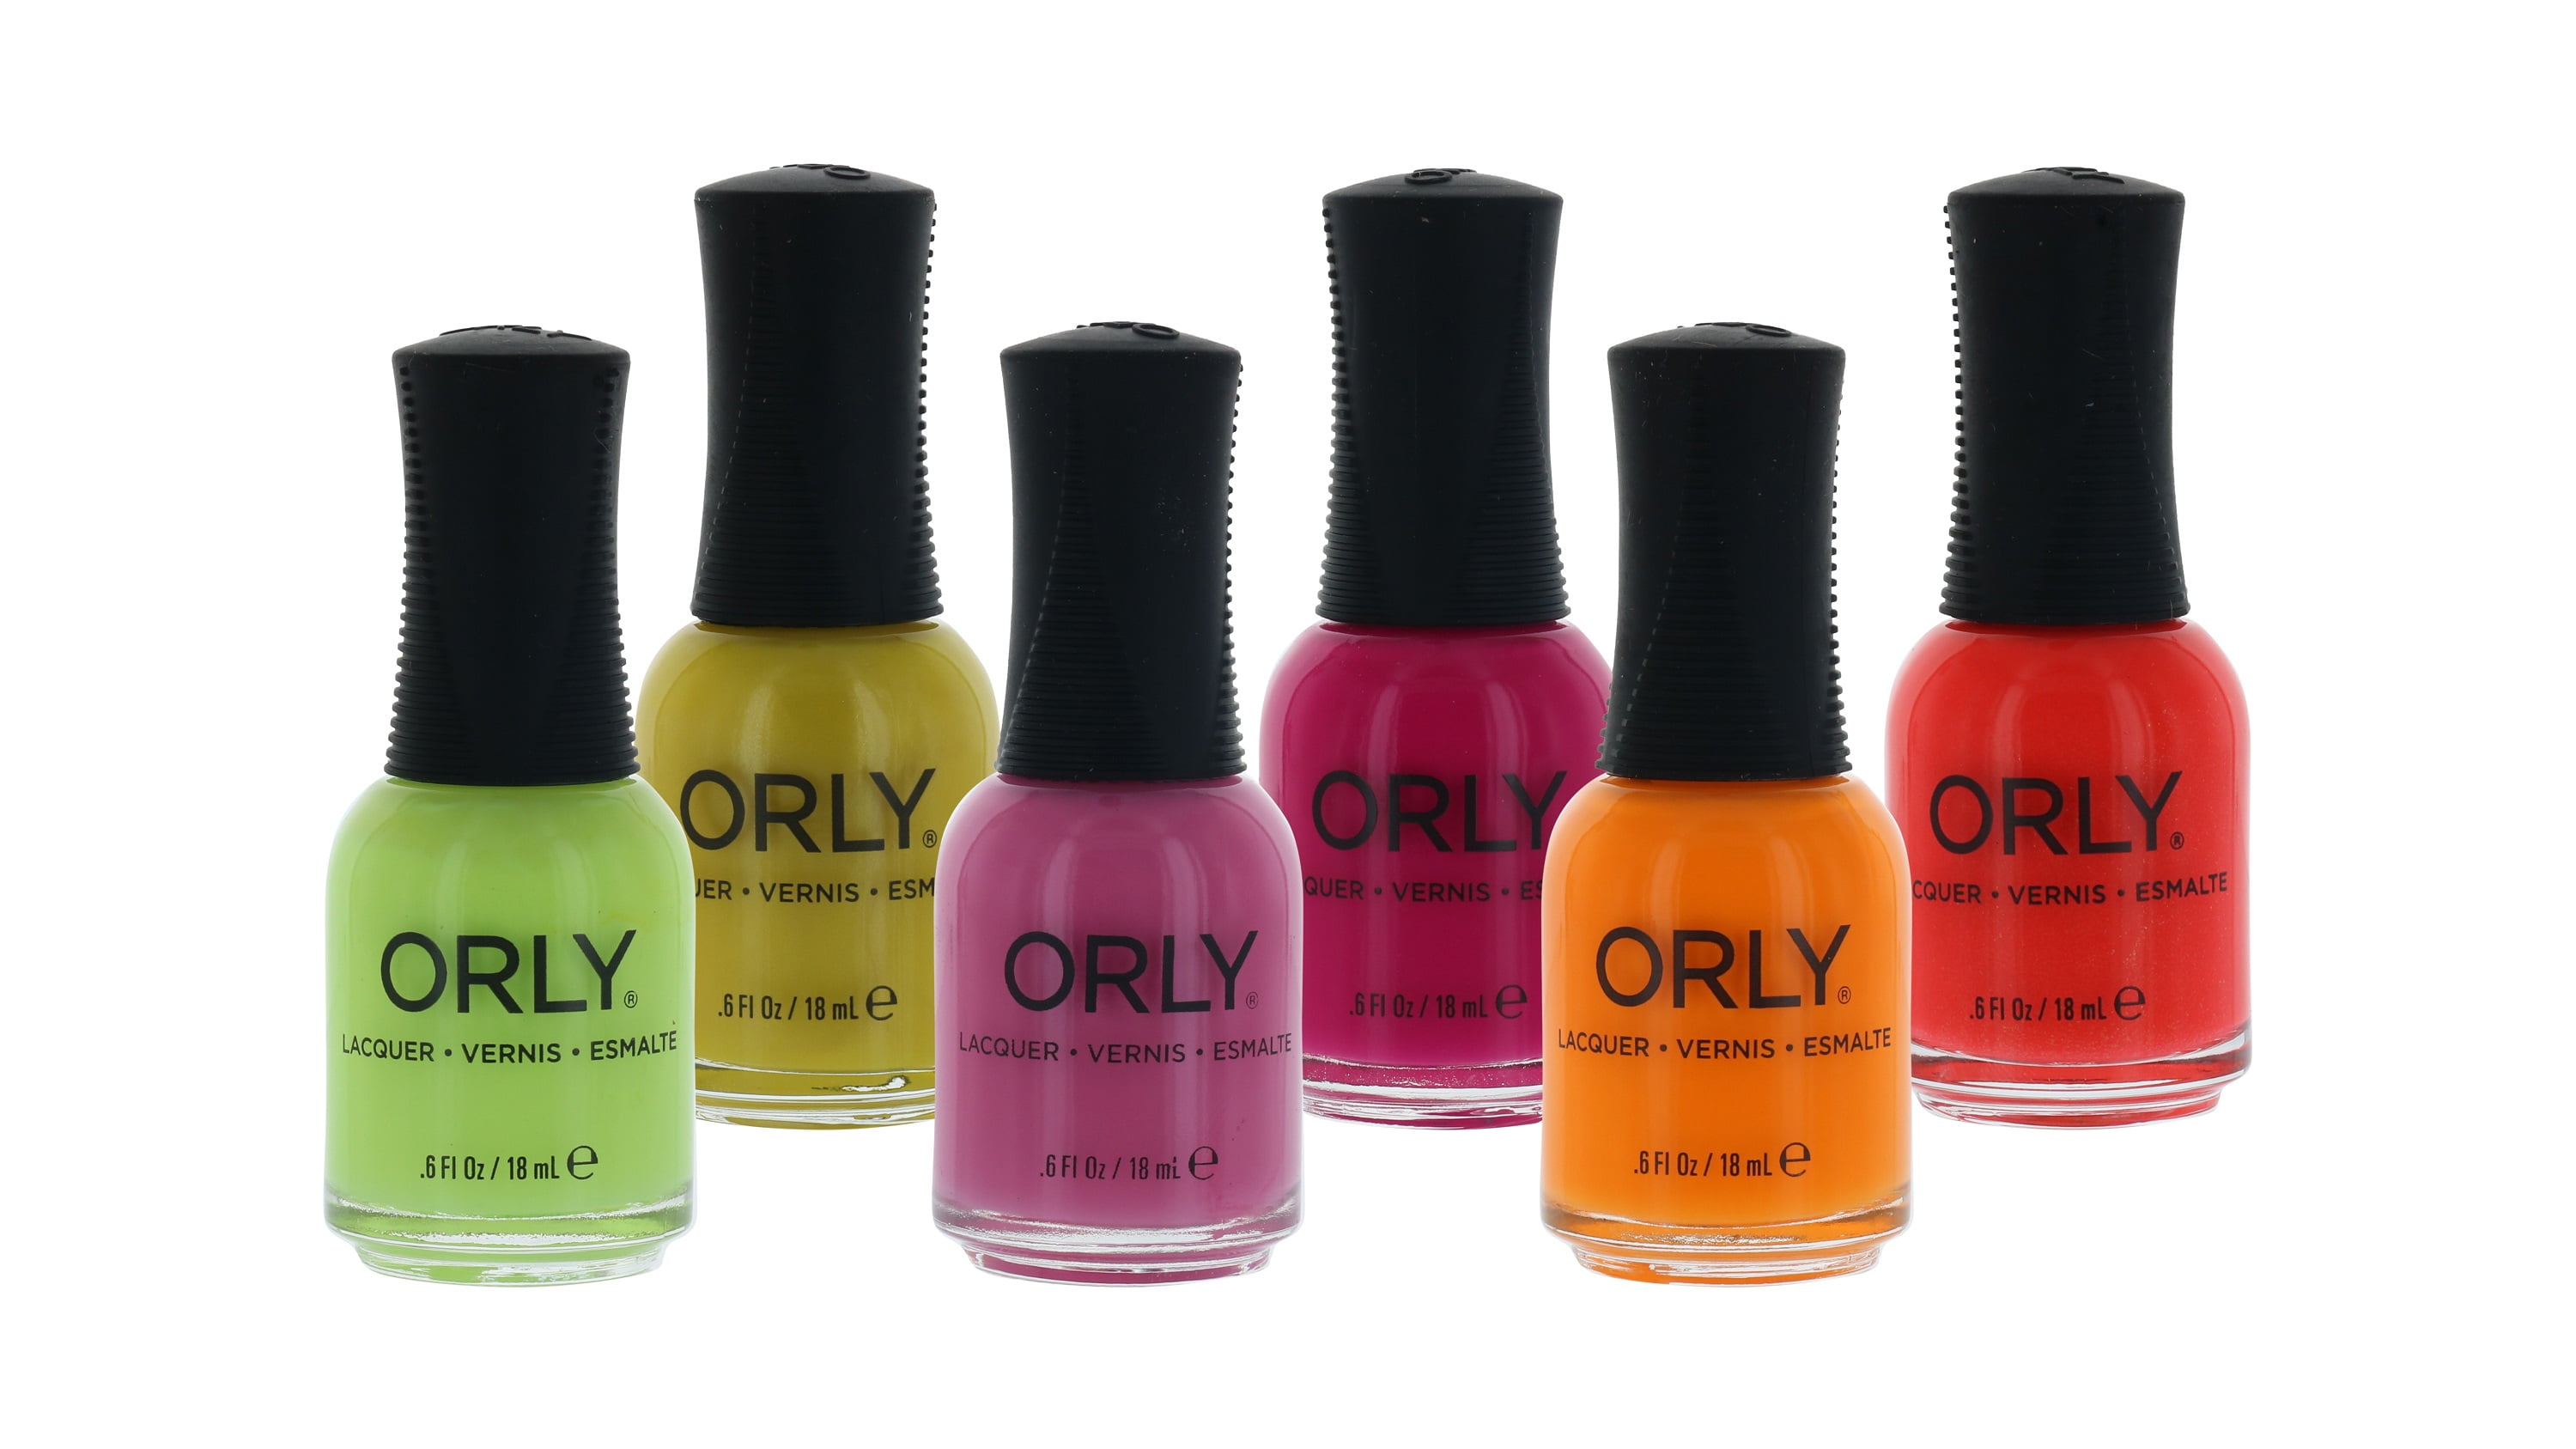 7. Orly Nail Lacquer in "Mirrorball" - wide 1